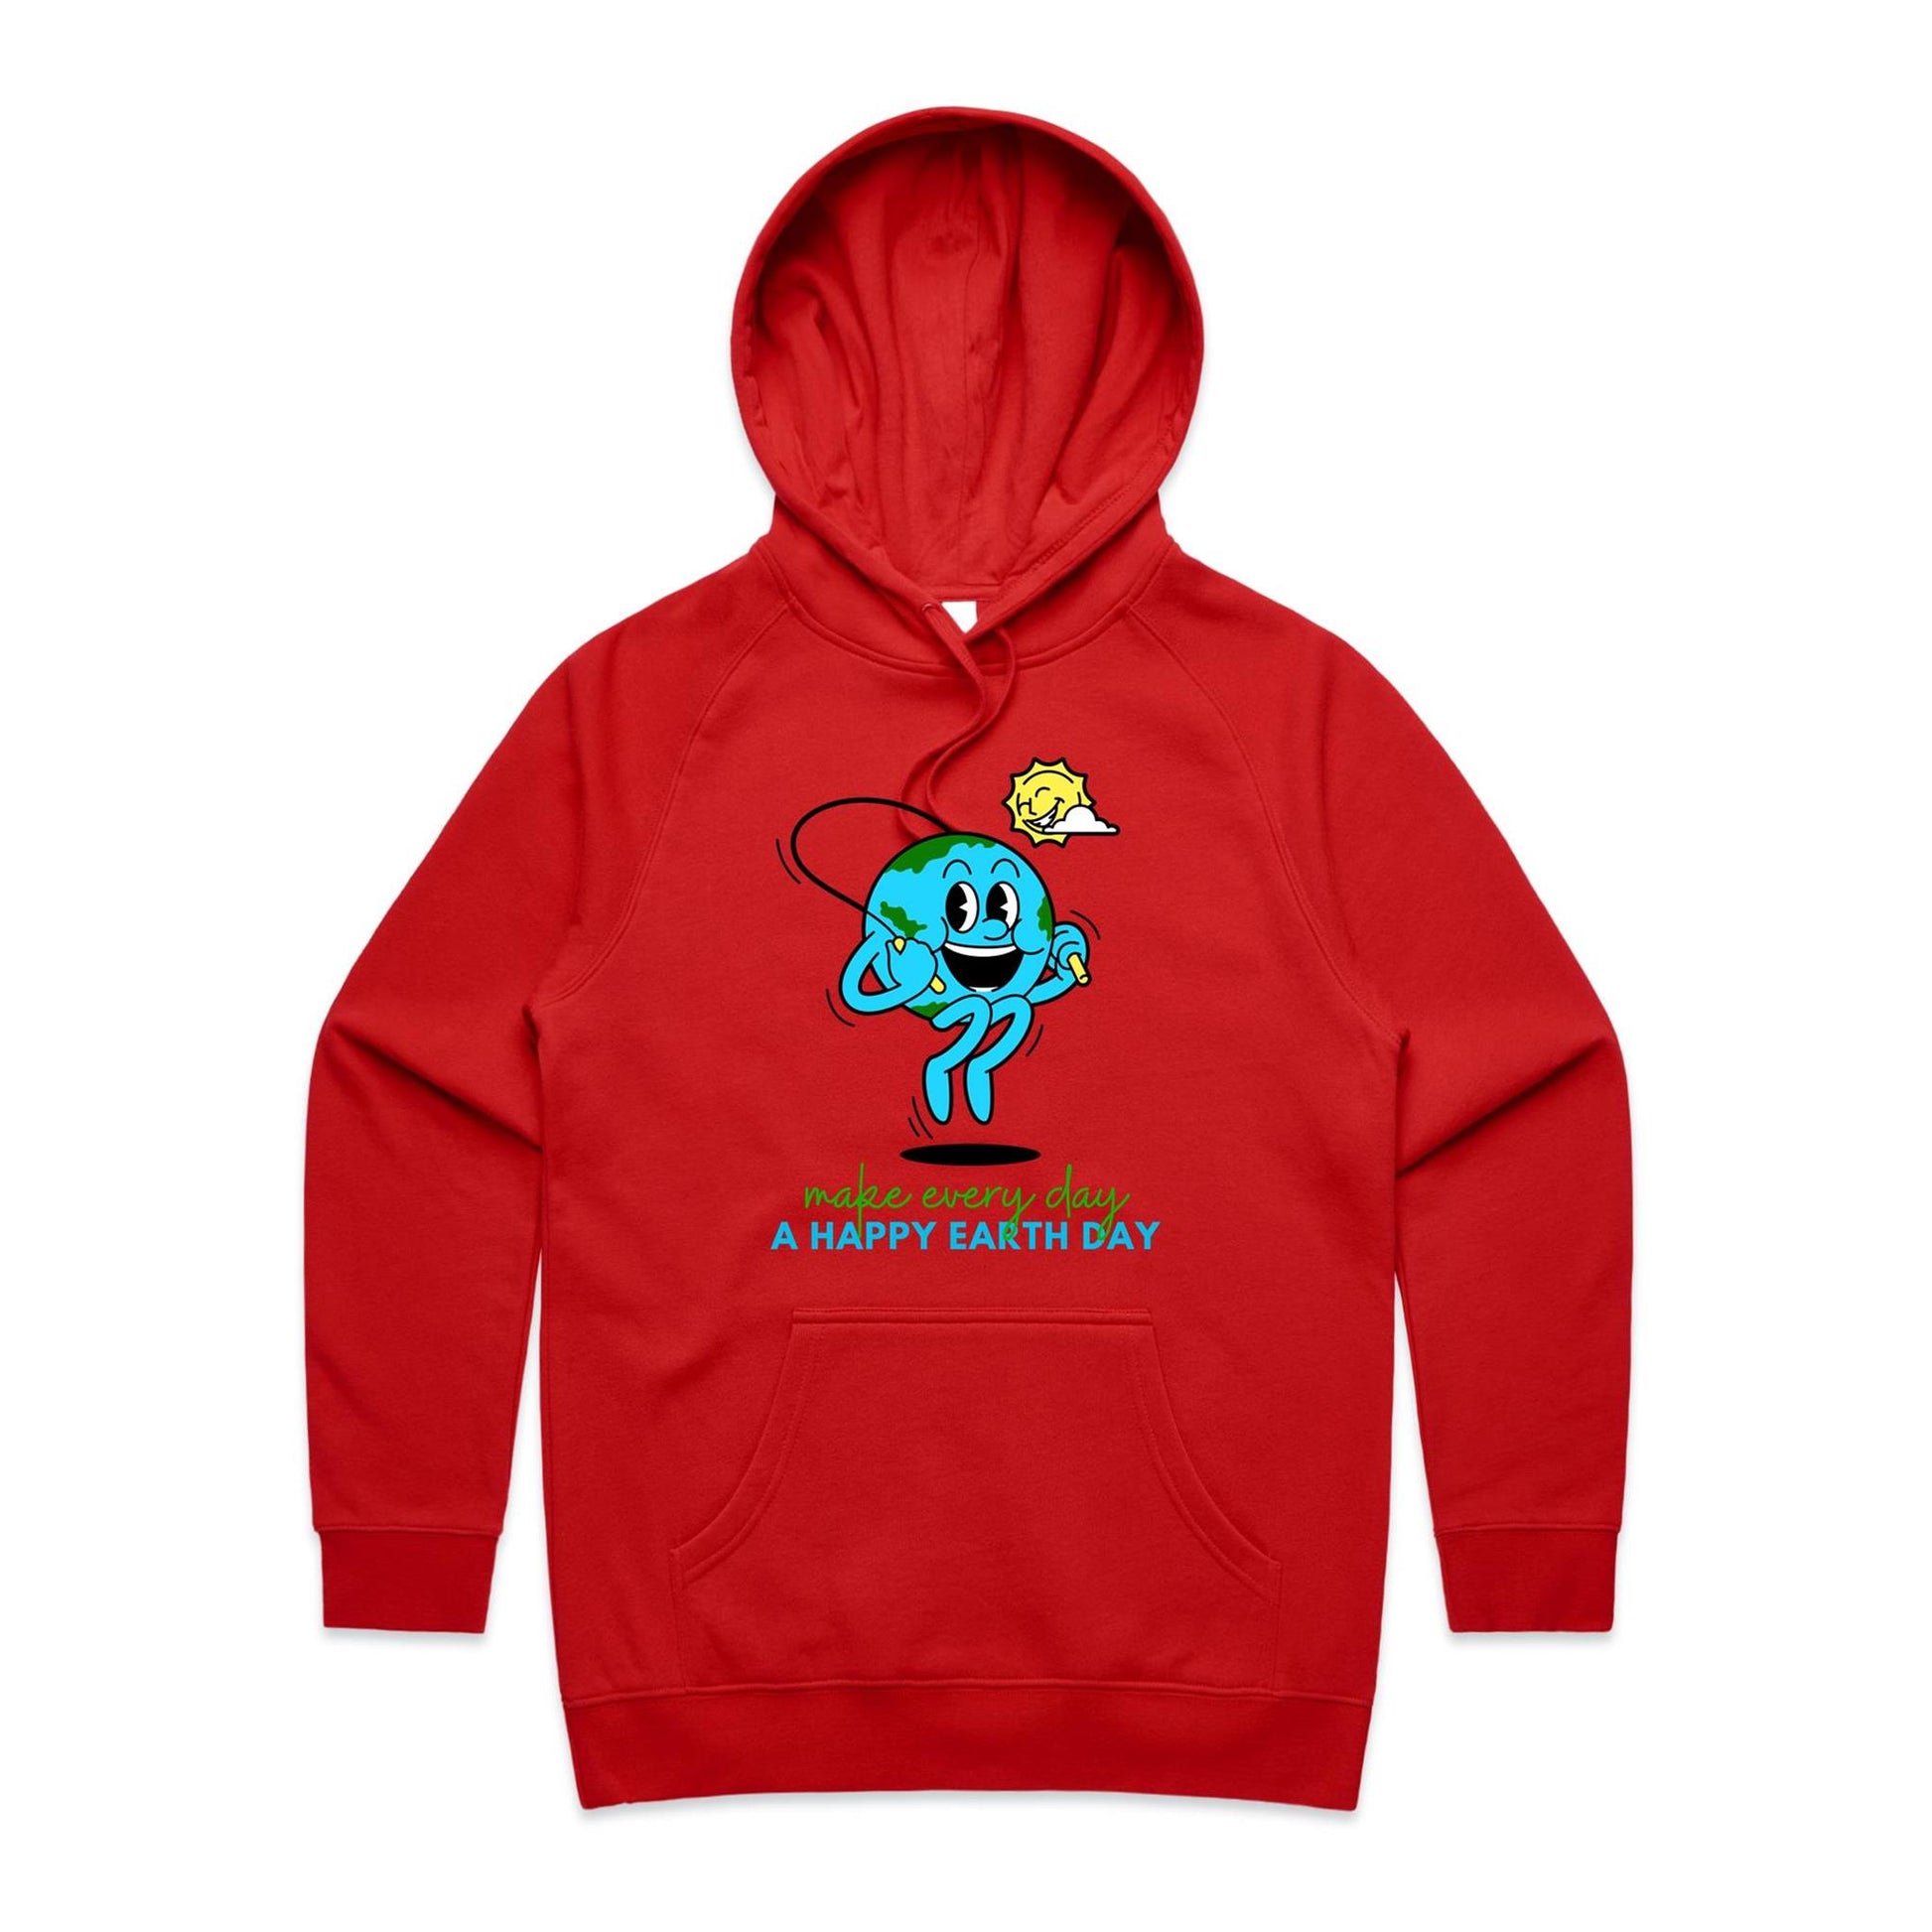 Make Every Day A Happy Earth Day - Women's Supply Hood Red Womens Supply Hoodie Environment